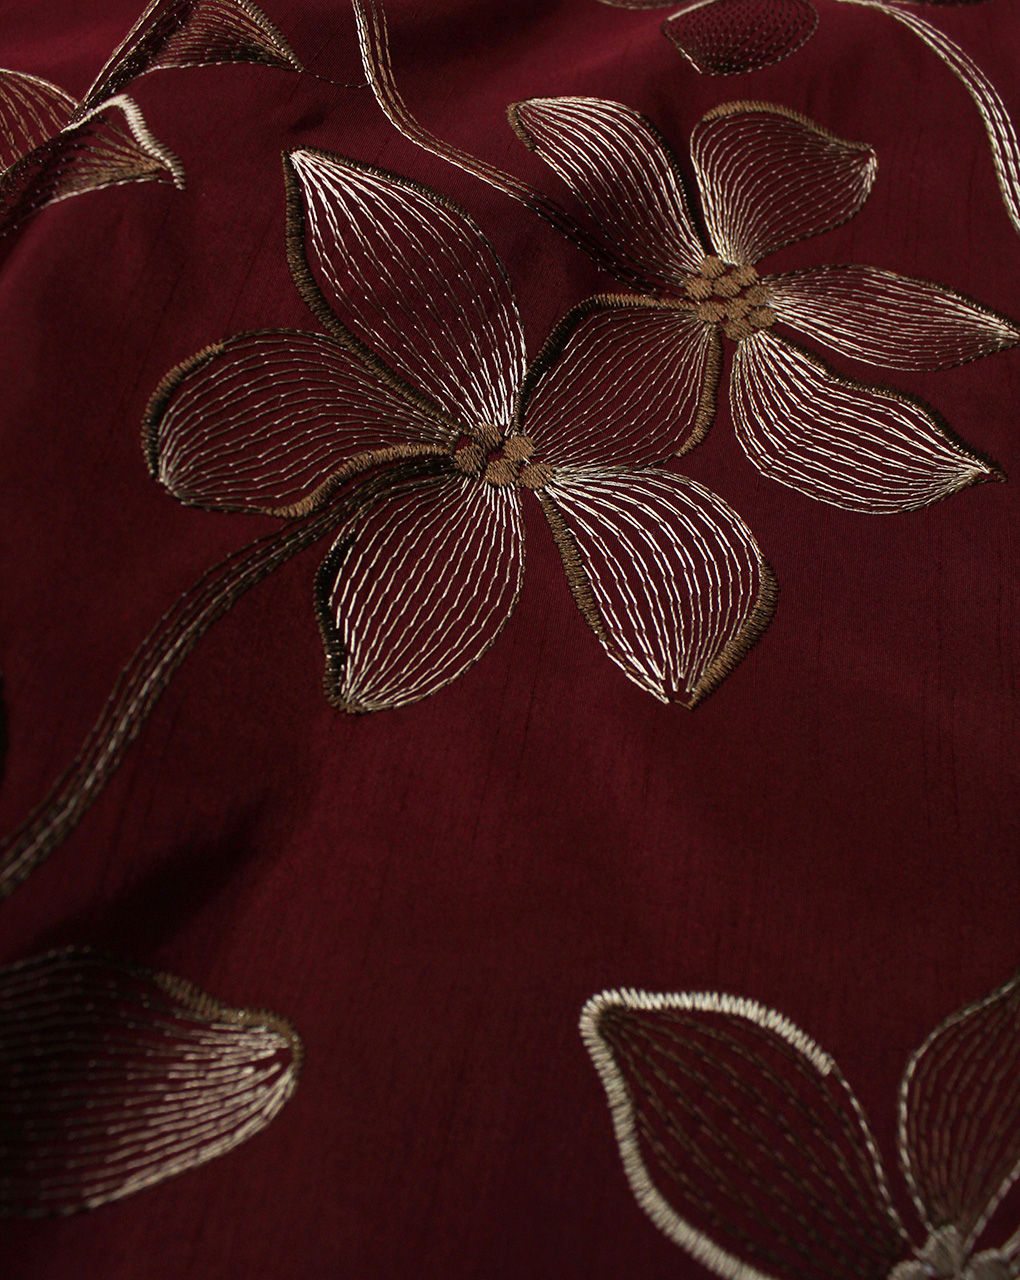 Maroon Floral Design Polyester Dupion Embroidered Fabric